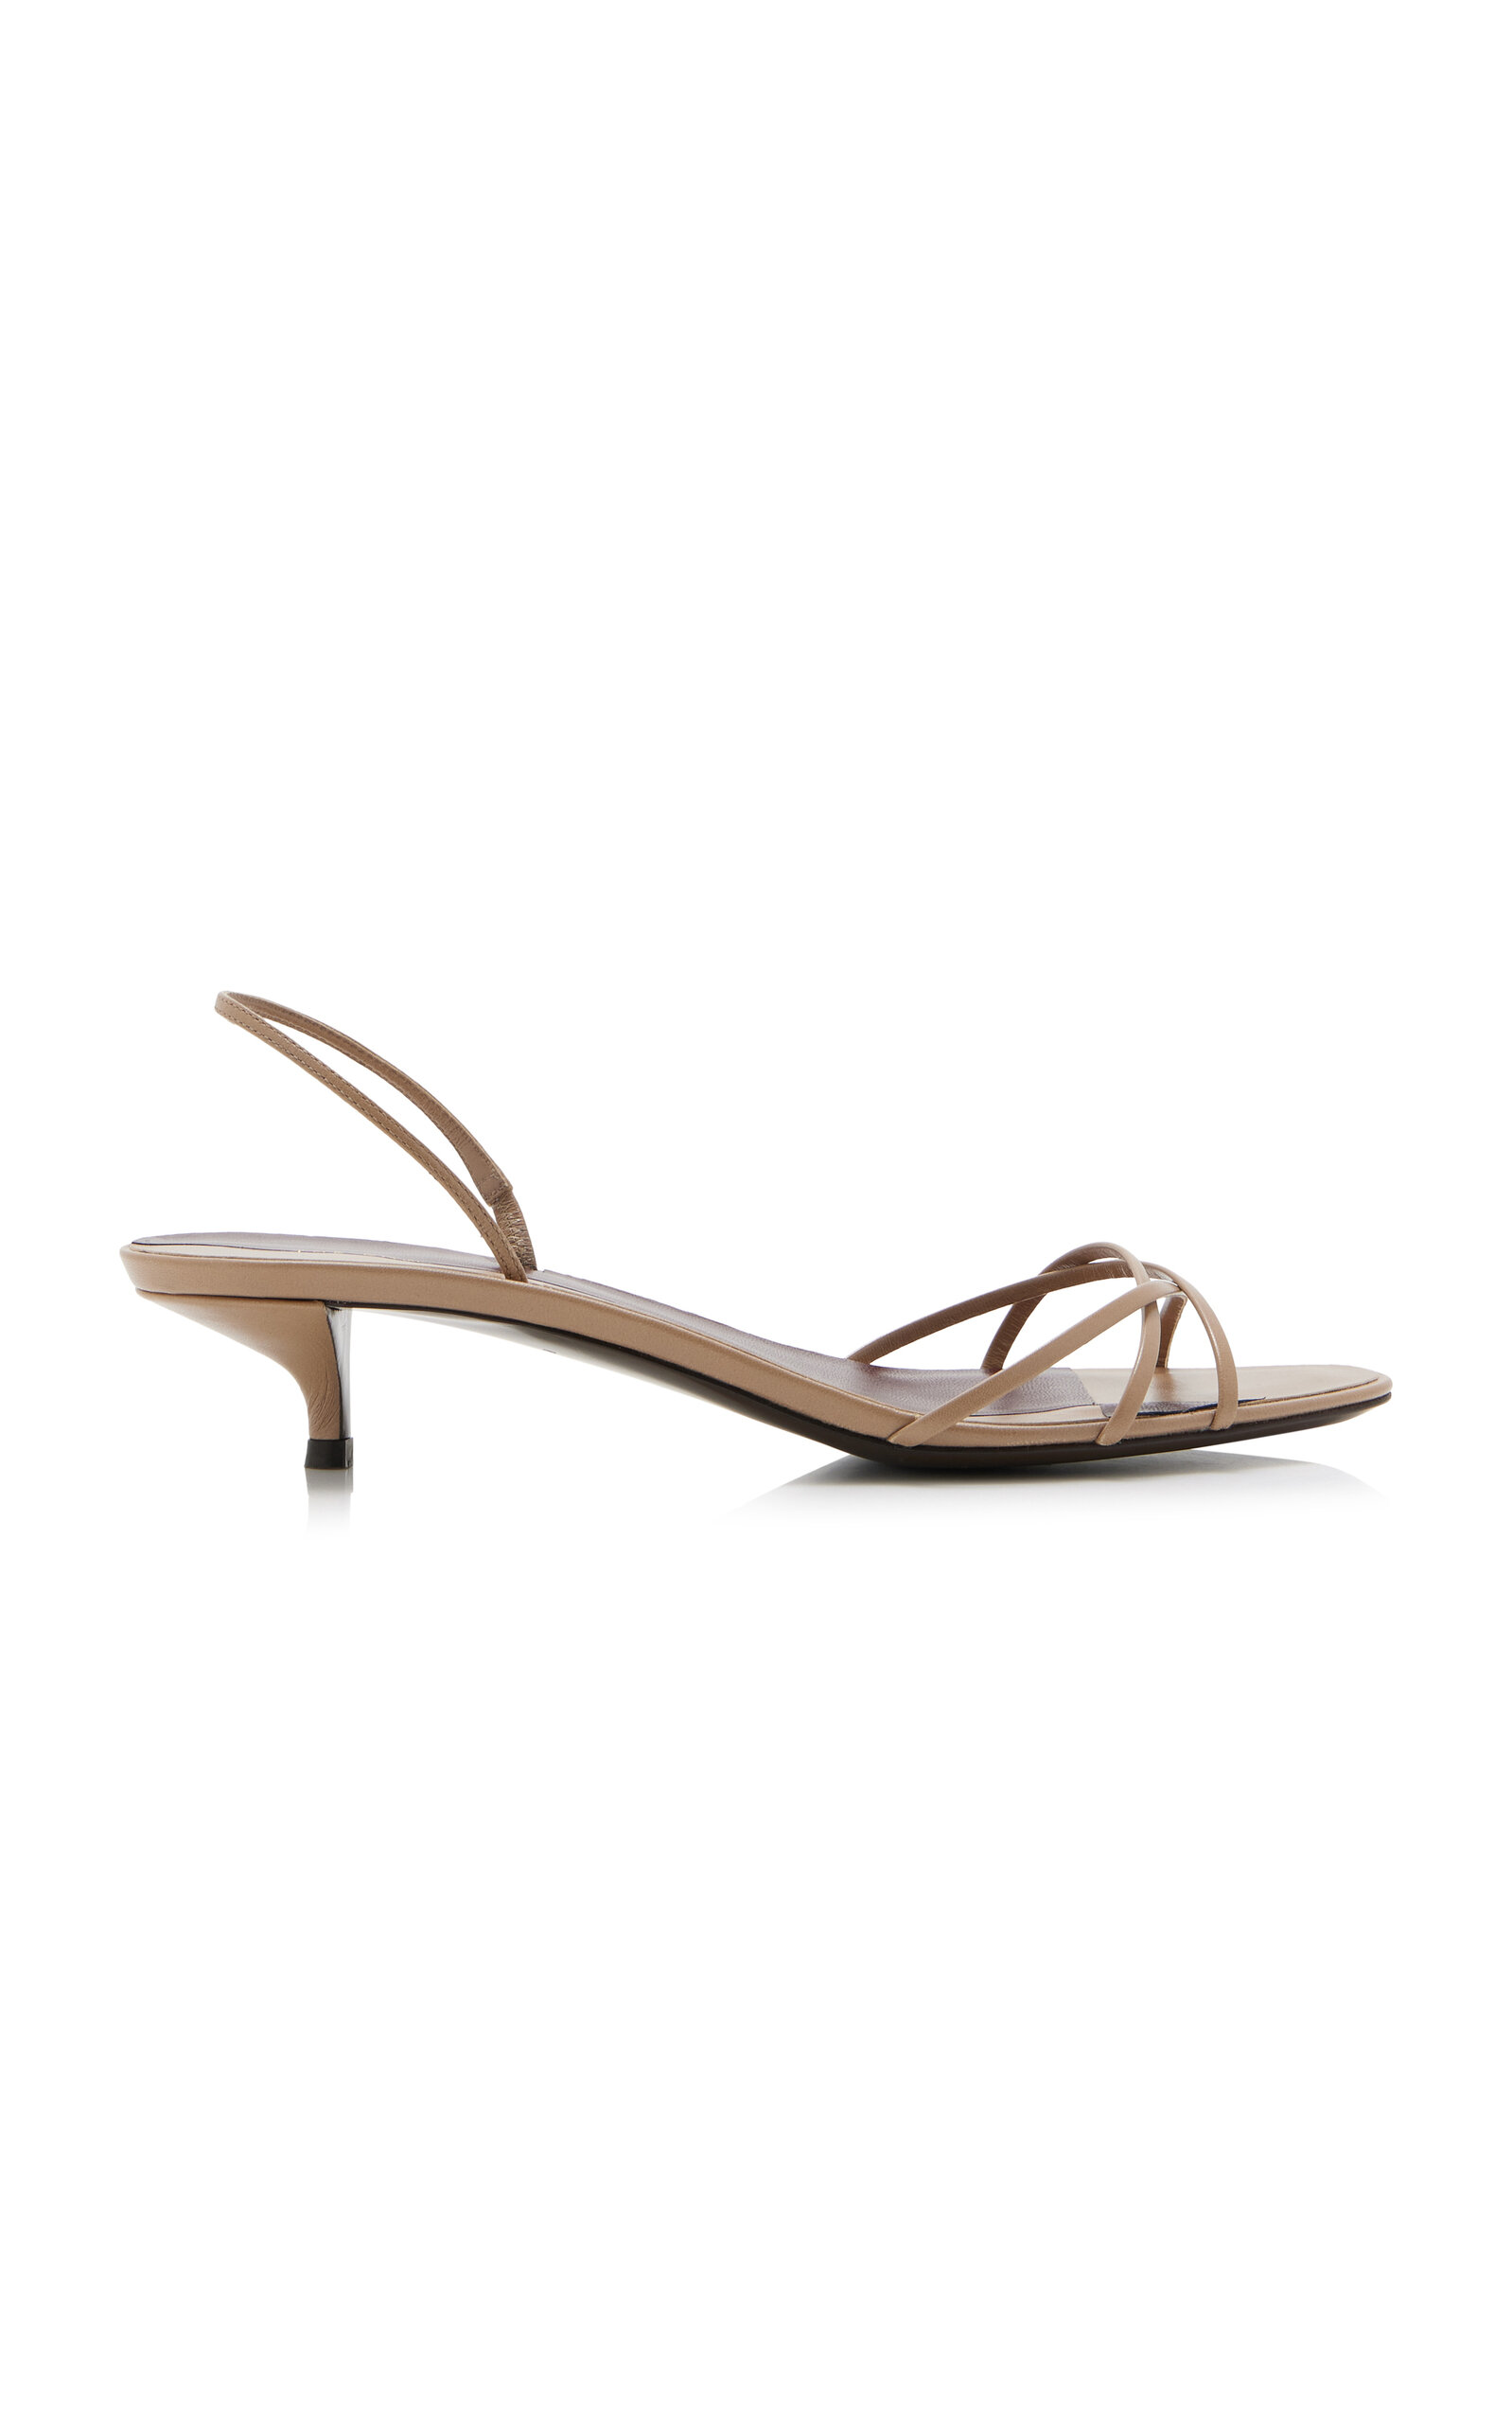 Harlow Leather Sandals